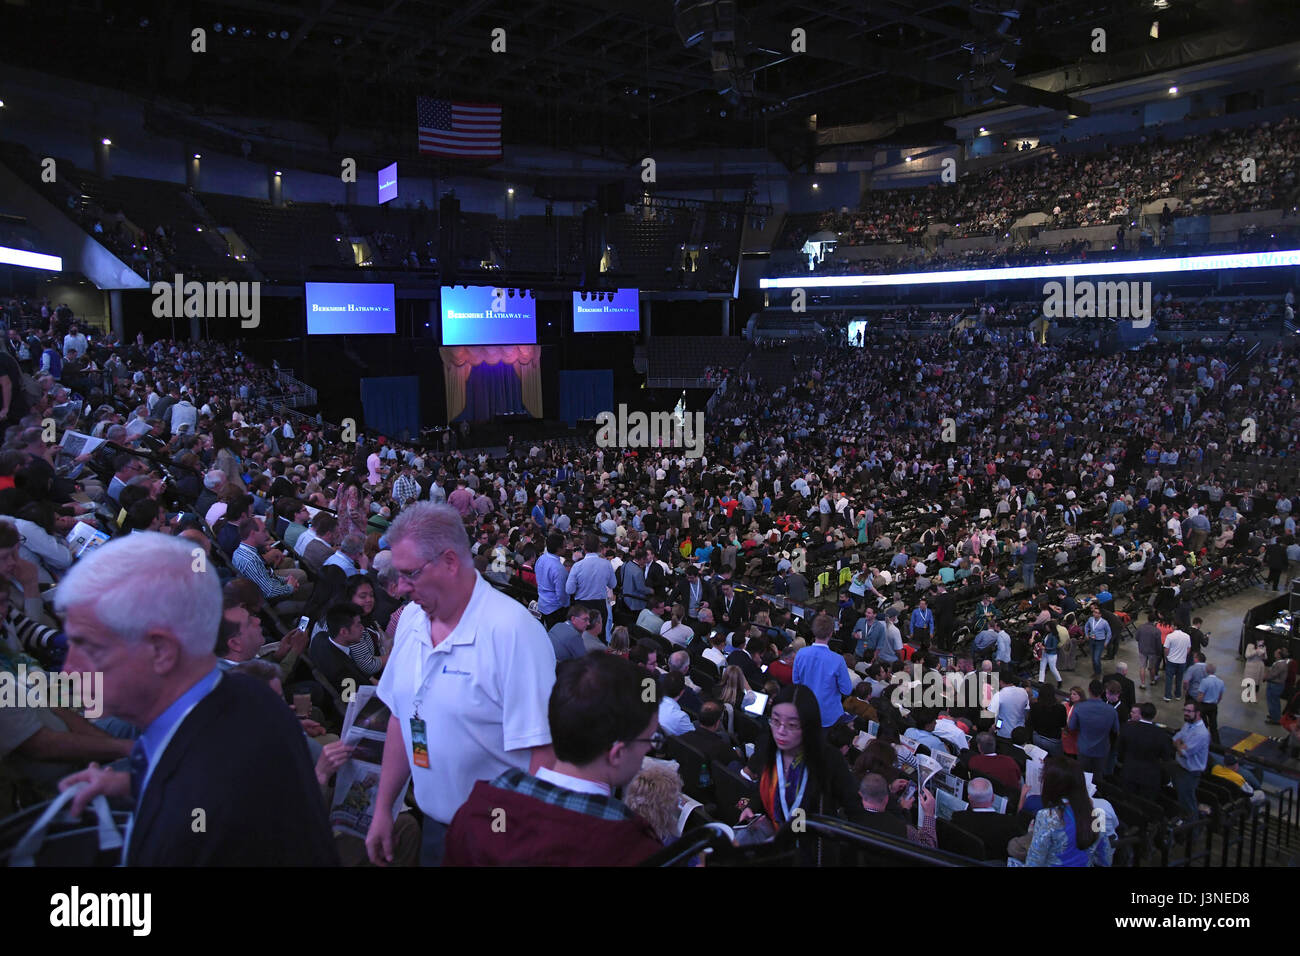 Omaha, USA. 6th May, 2017. Shareholders attend Warren Buffett's Berkshire Hathaway Annual Meeting in Omaha, Nebraska, the United States, May 6, 2017. The event attracts more than 40,000 shareholders from around the world as well as a wide variety of media outlets to Omaha every year. Credit: Yin Bogu/Xinhua/Alamy Live News Stock Photo